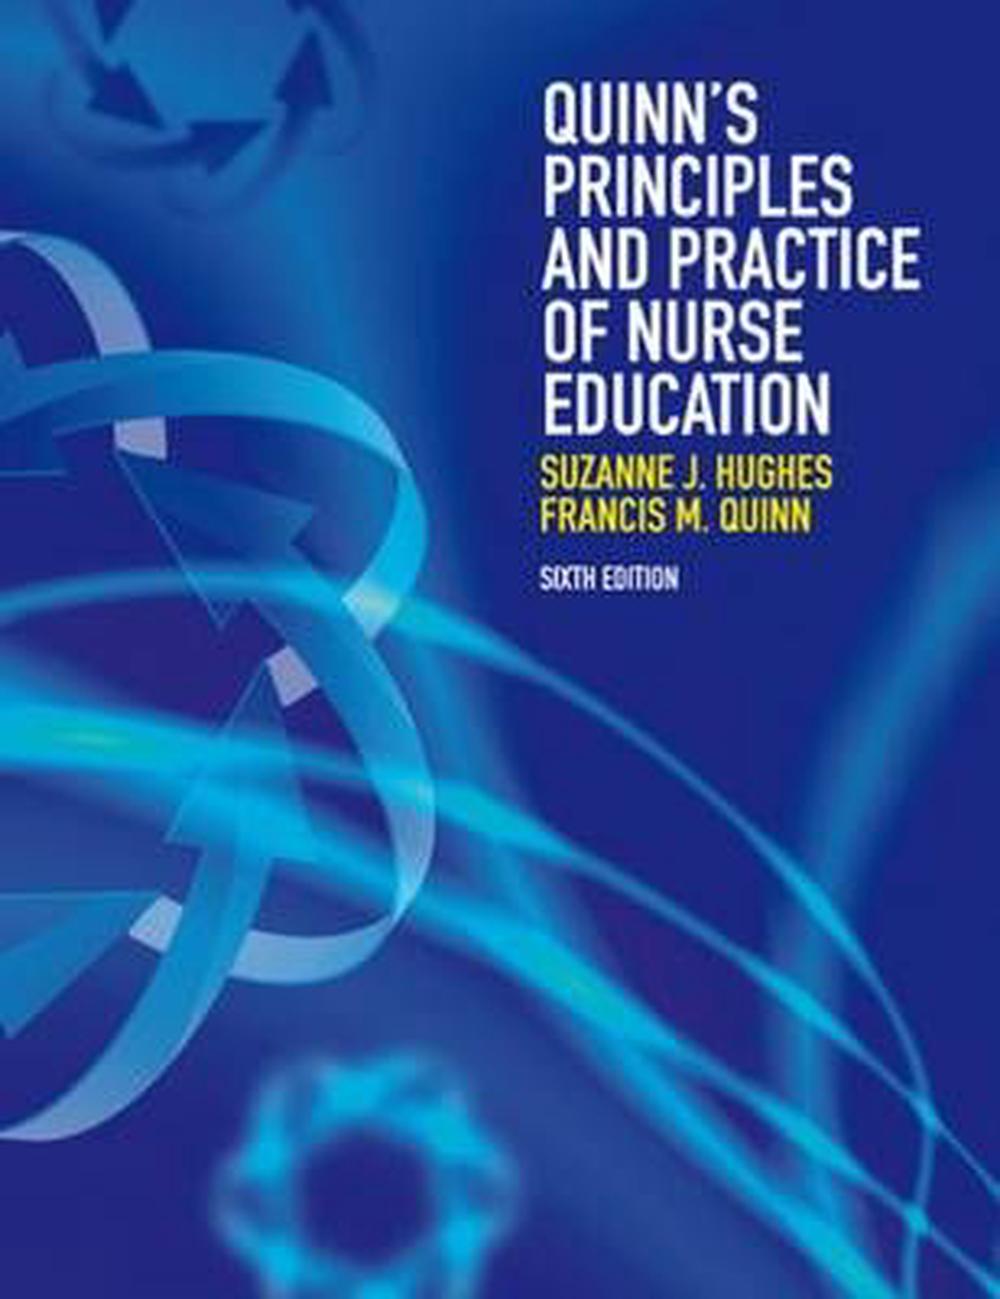 Quinn's Principles and Practice of Nurse Education by Francis Quinn, 9781408074756 Buy online